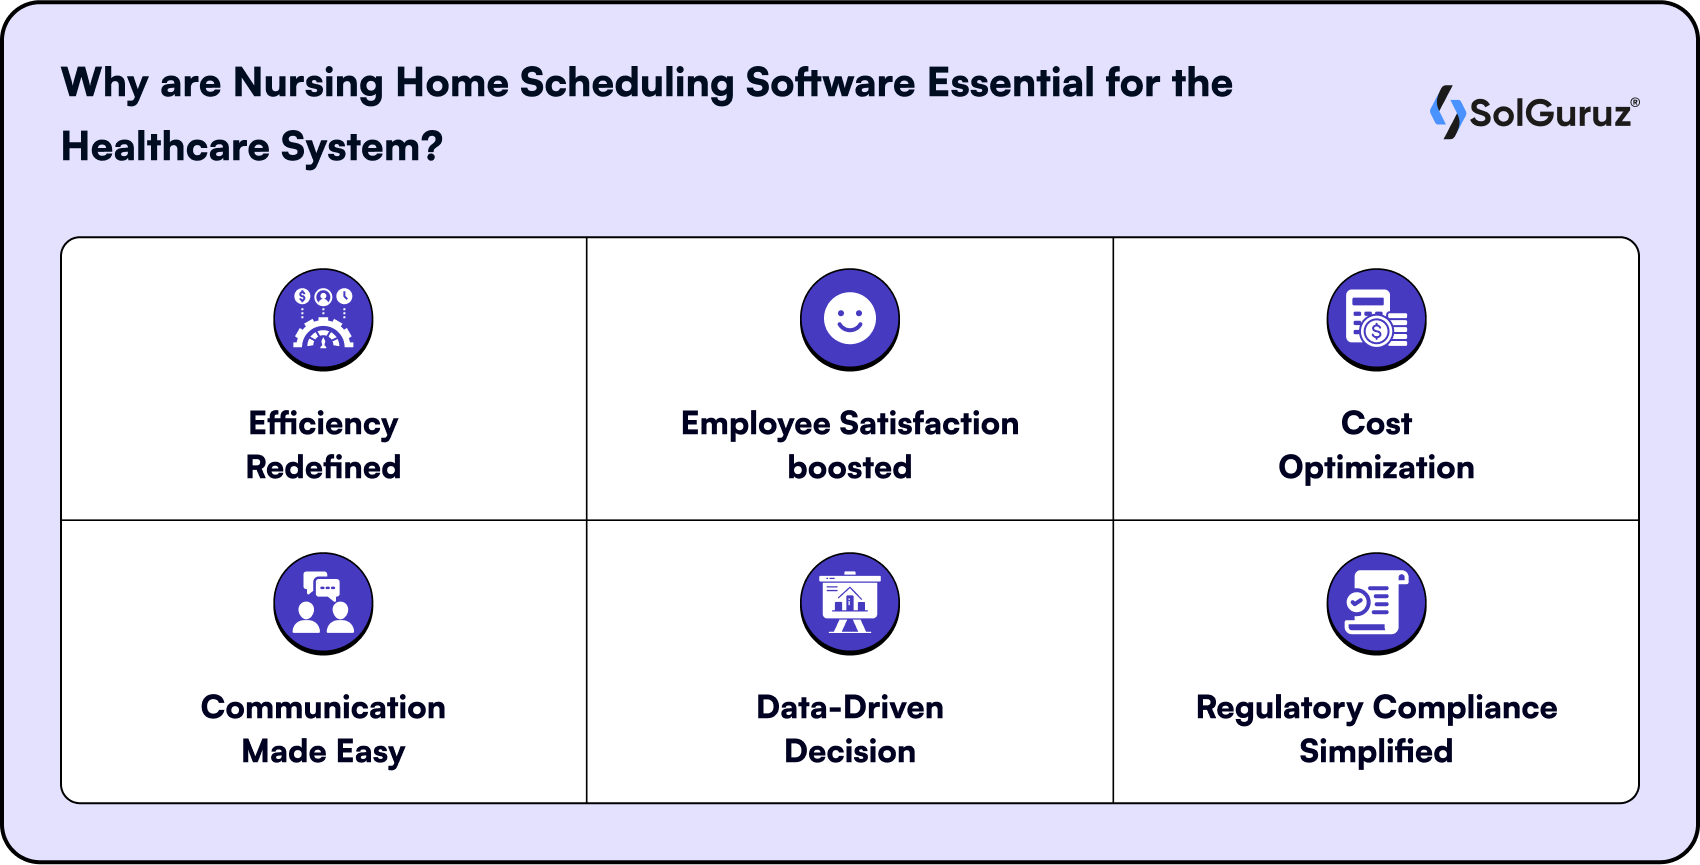 Why are Nursing Home Scheduling Software Essential for the Healthcare System